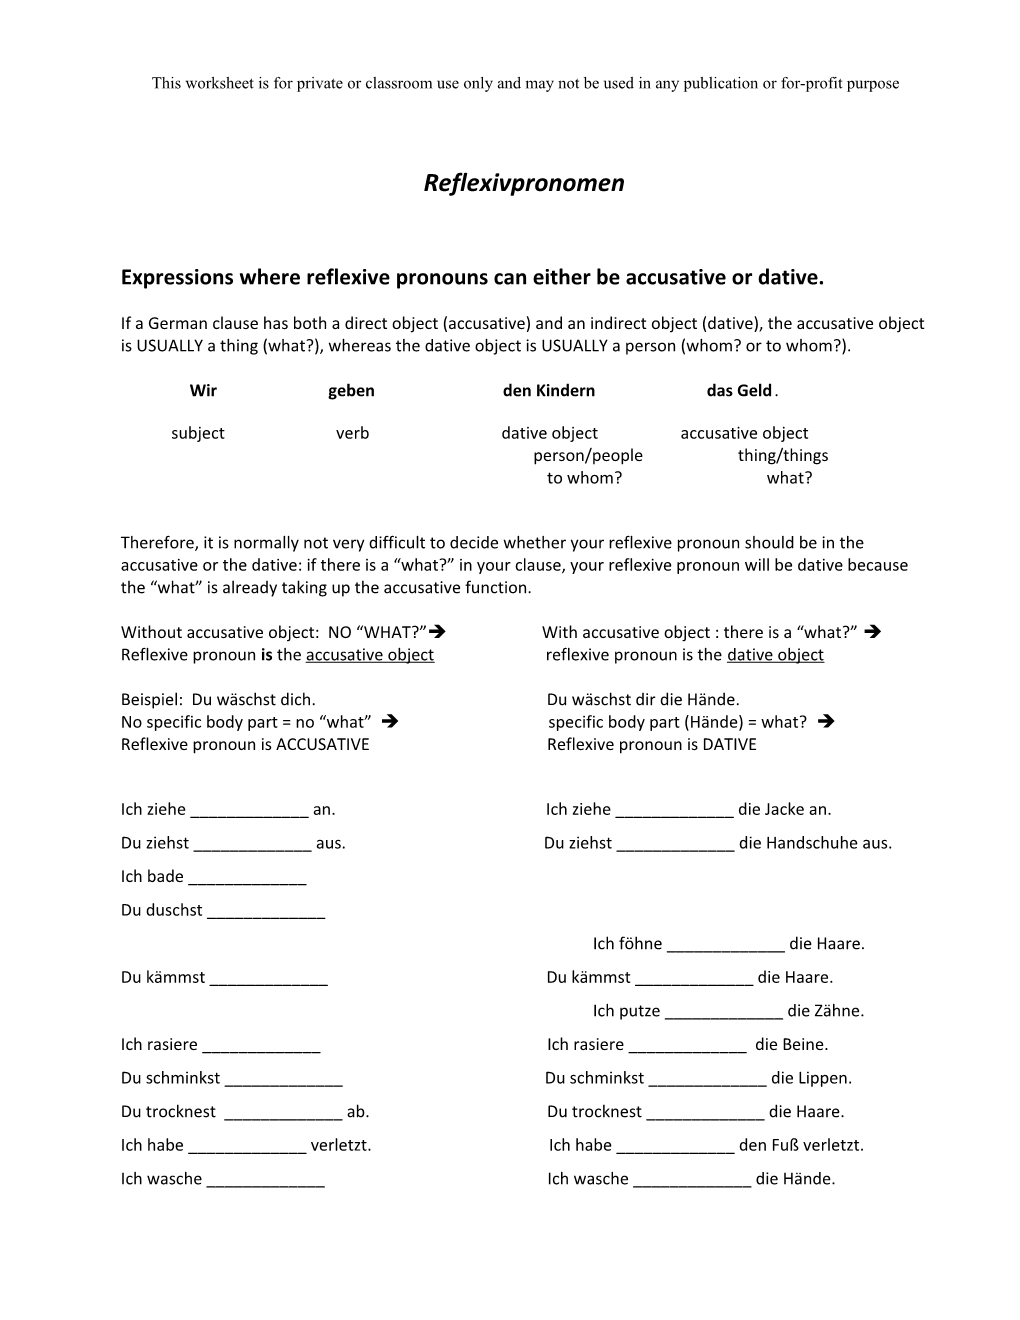 This Worksheet Is for Private Or Classroom Use Only and May Not Be Used in Any Publication